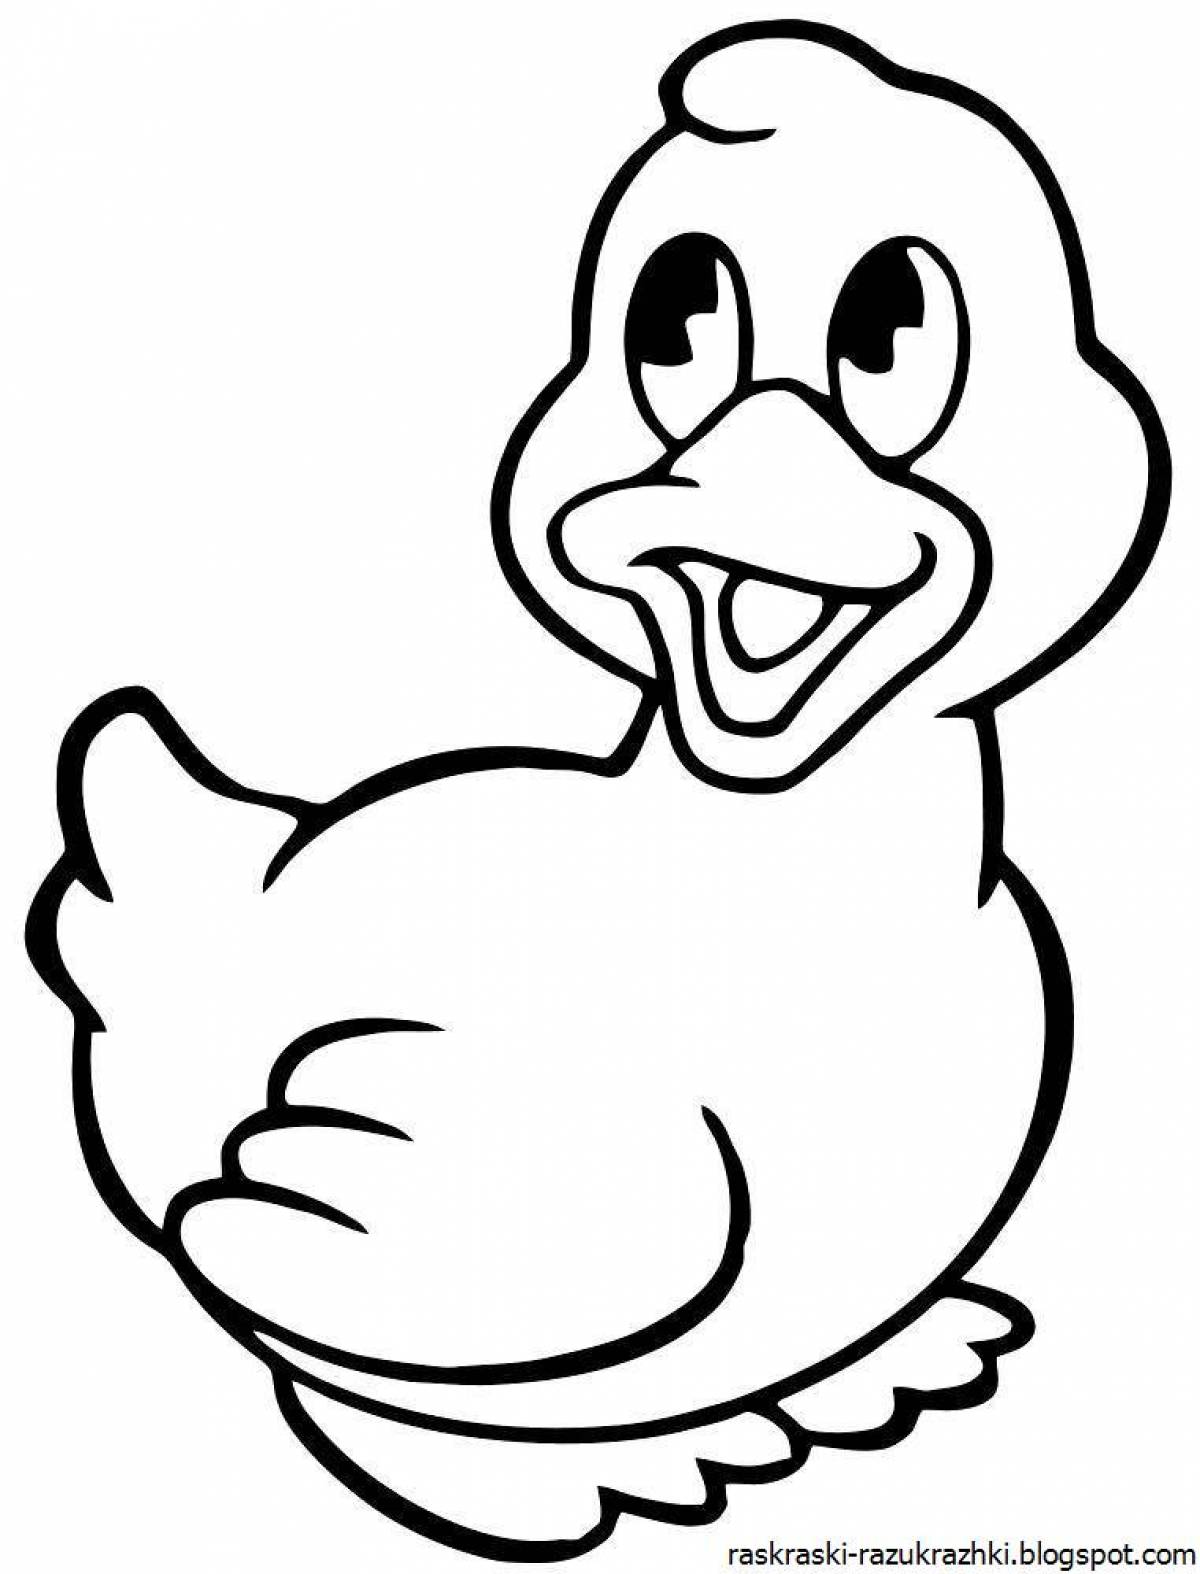 Glittering duck coloring book for kids